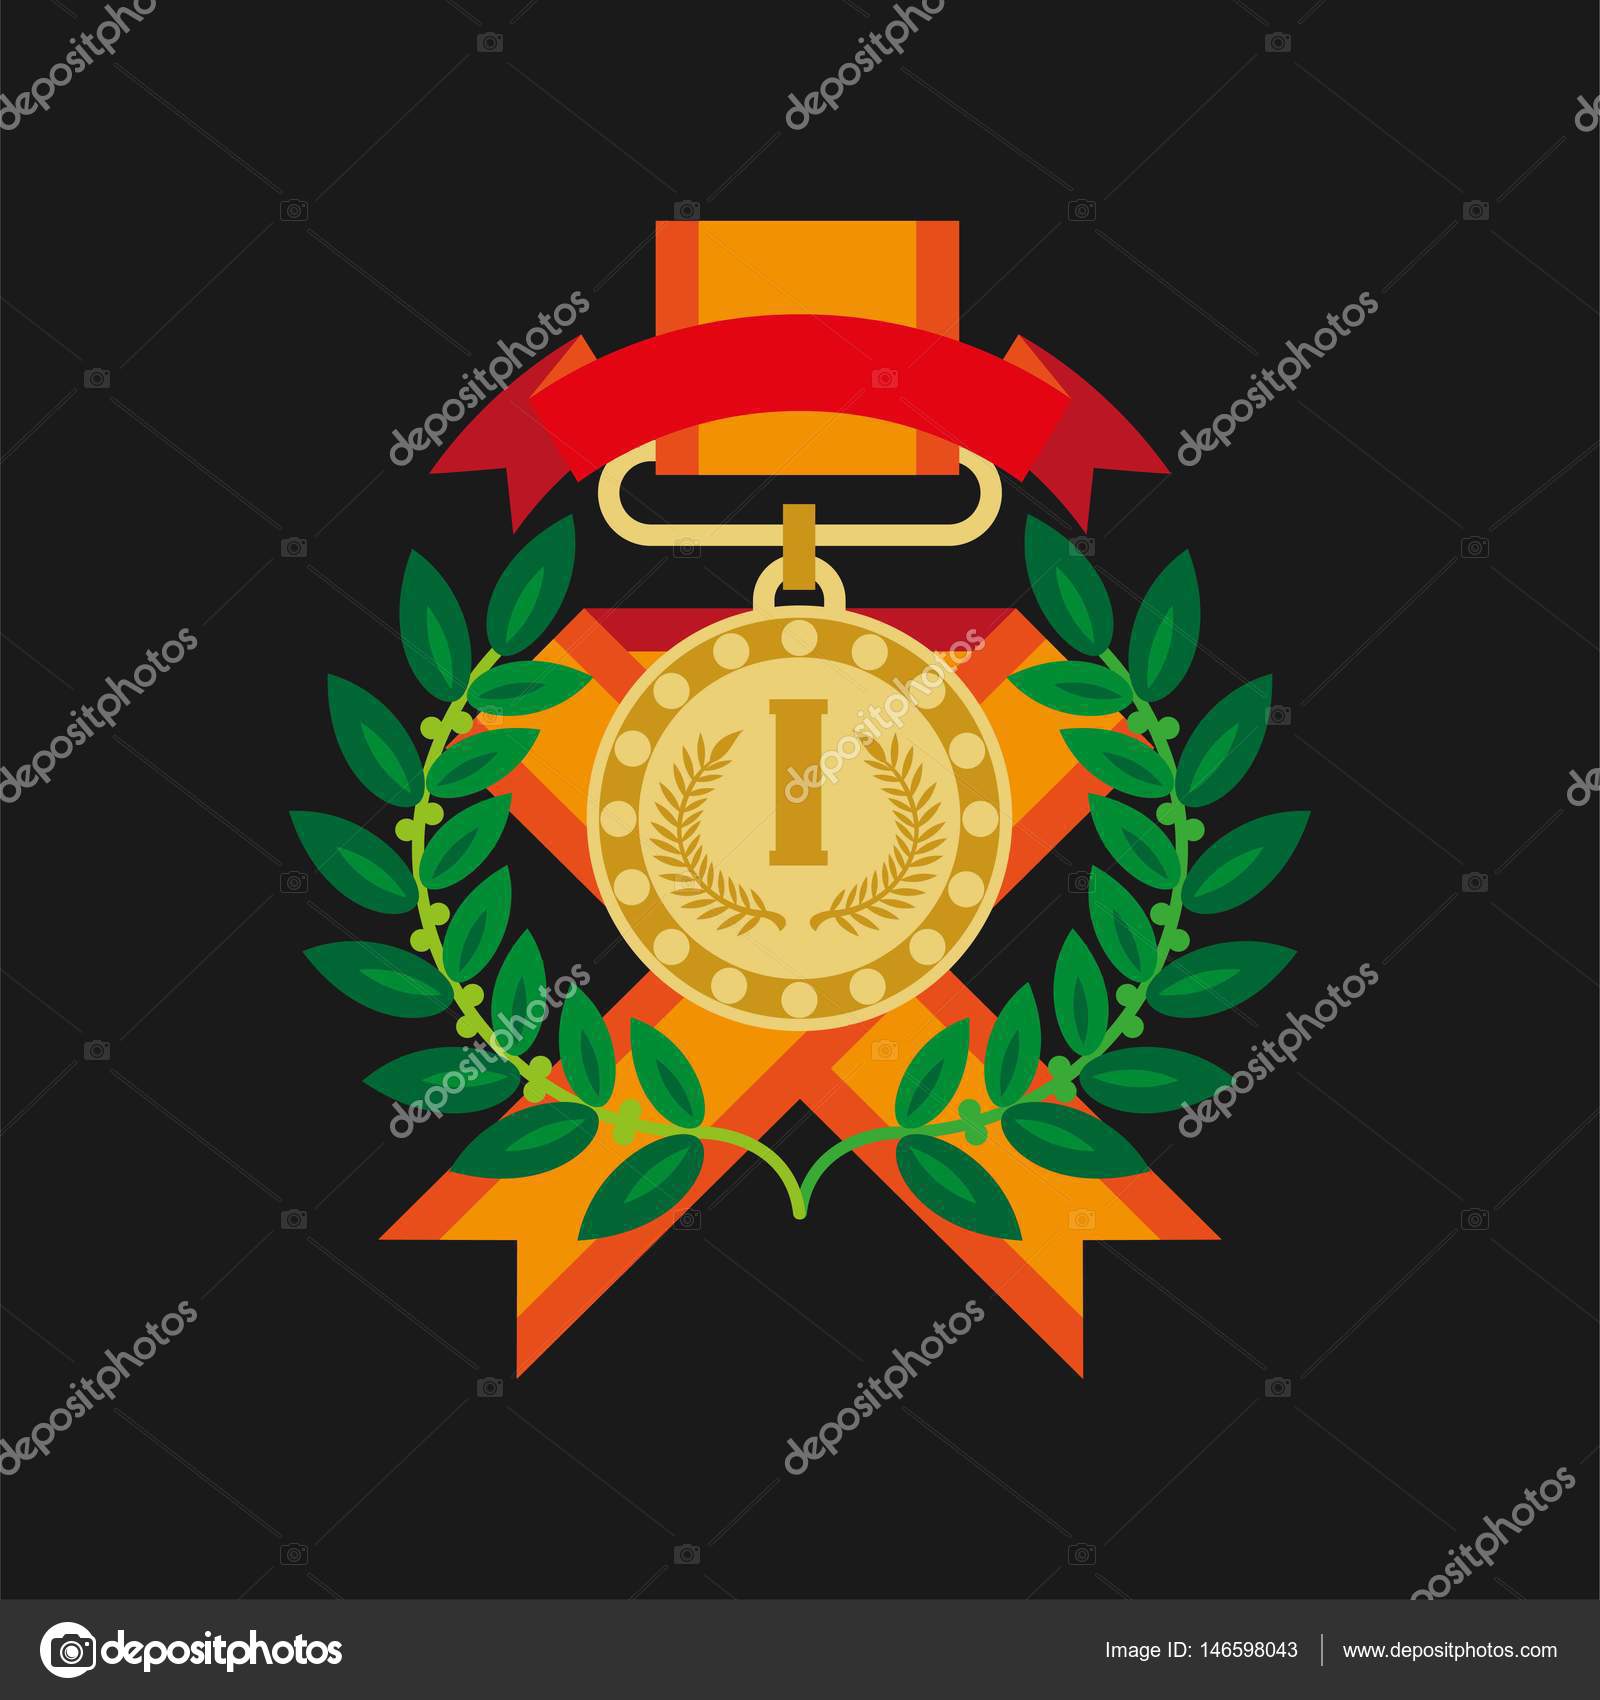 Medal set stock vector. Illustration of victorious, metallic - 20845976